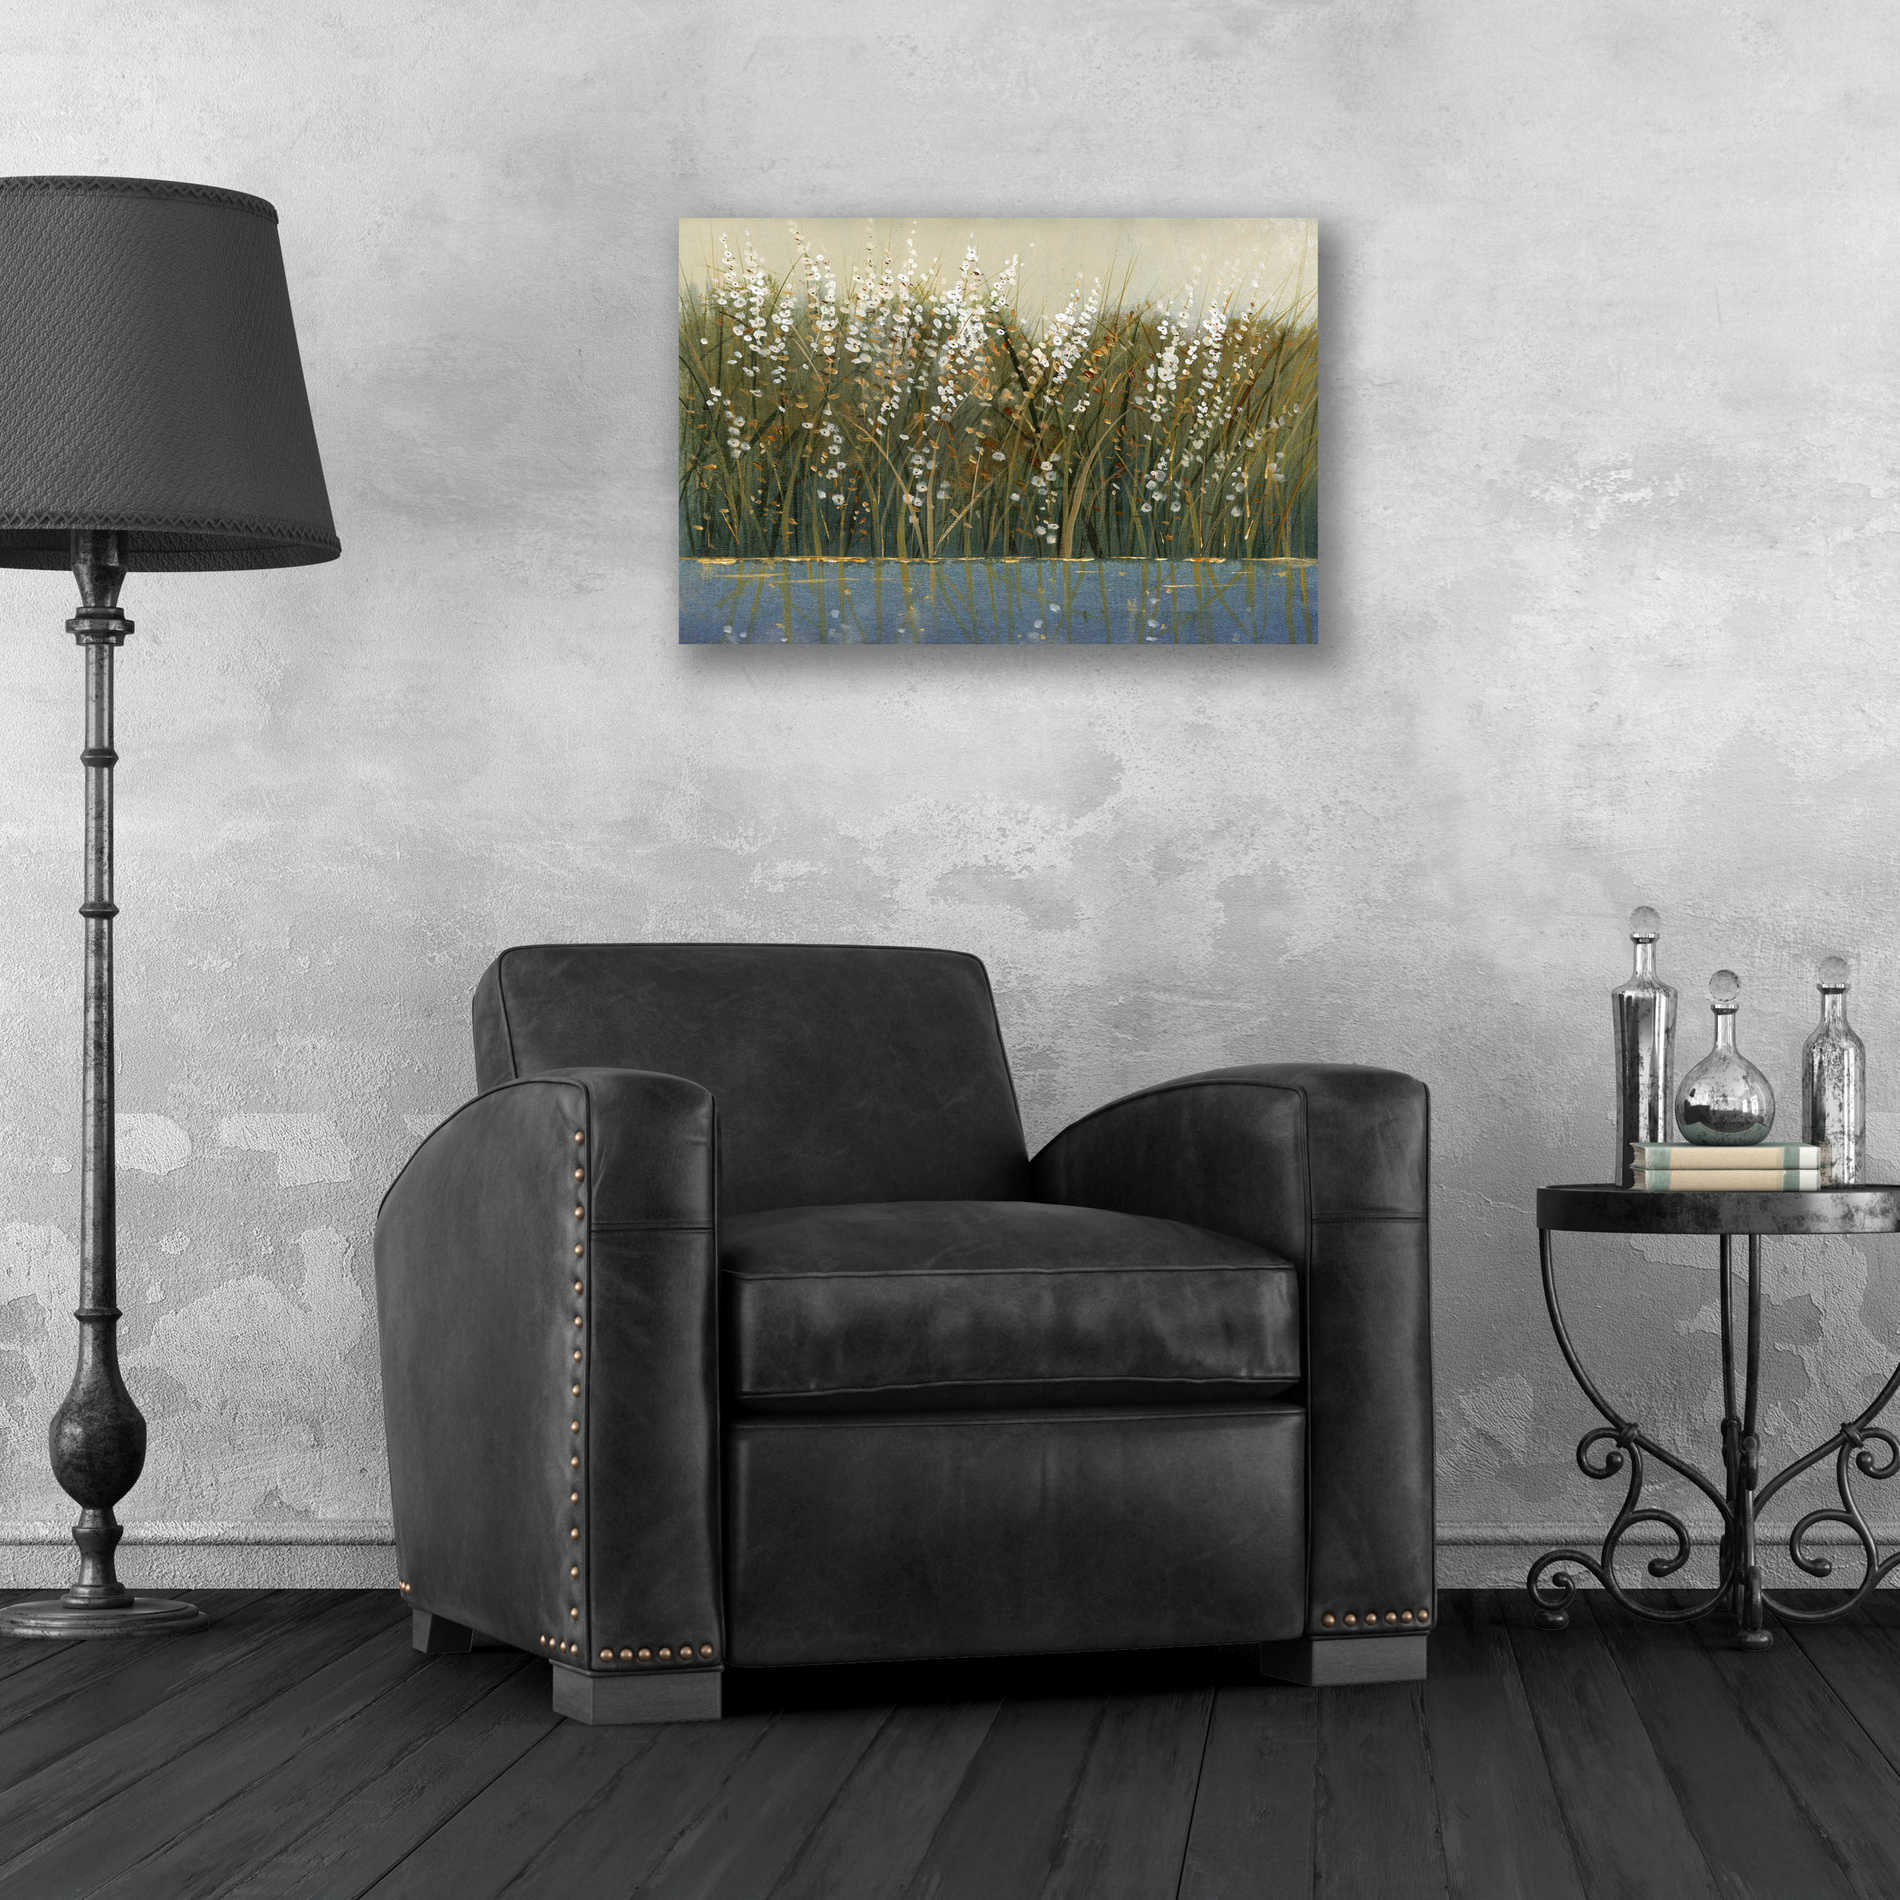 Epic Art 'By the Tall Grass I' by Tim O'Toole, Acrylic Glass Wall Art,24x16